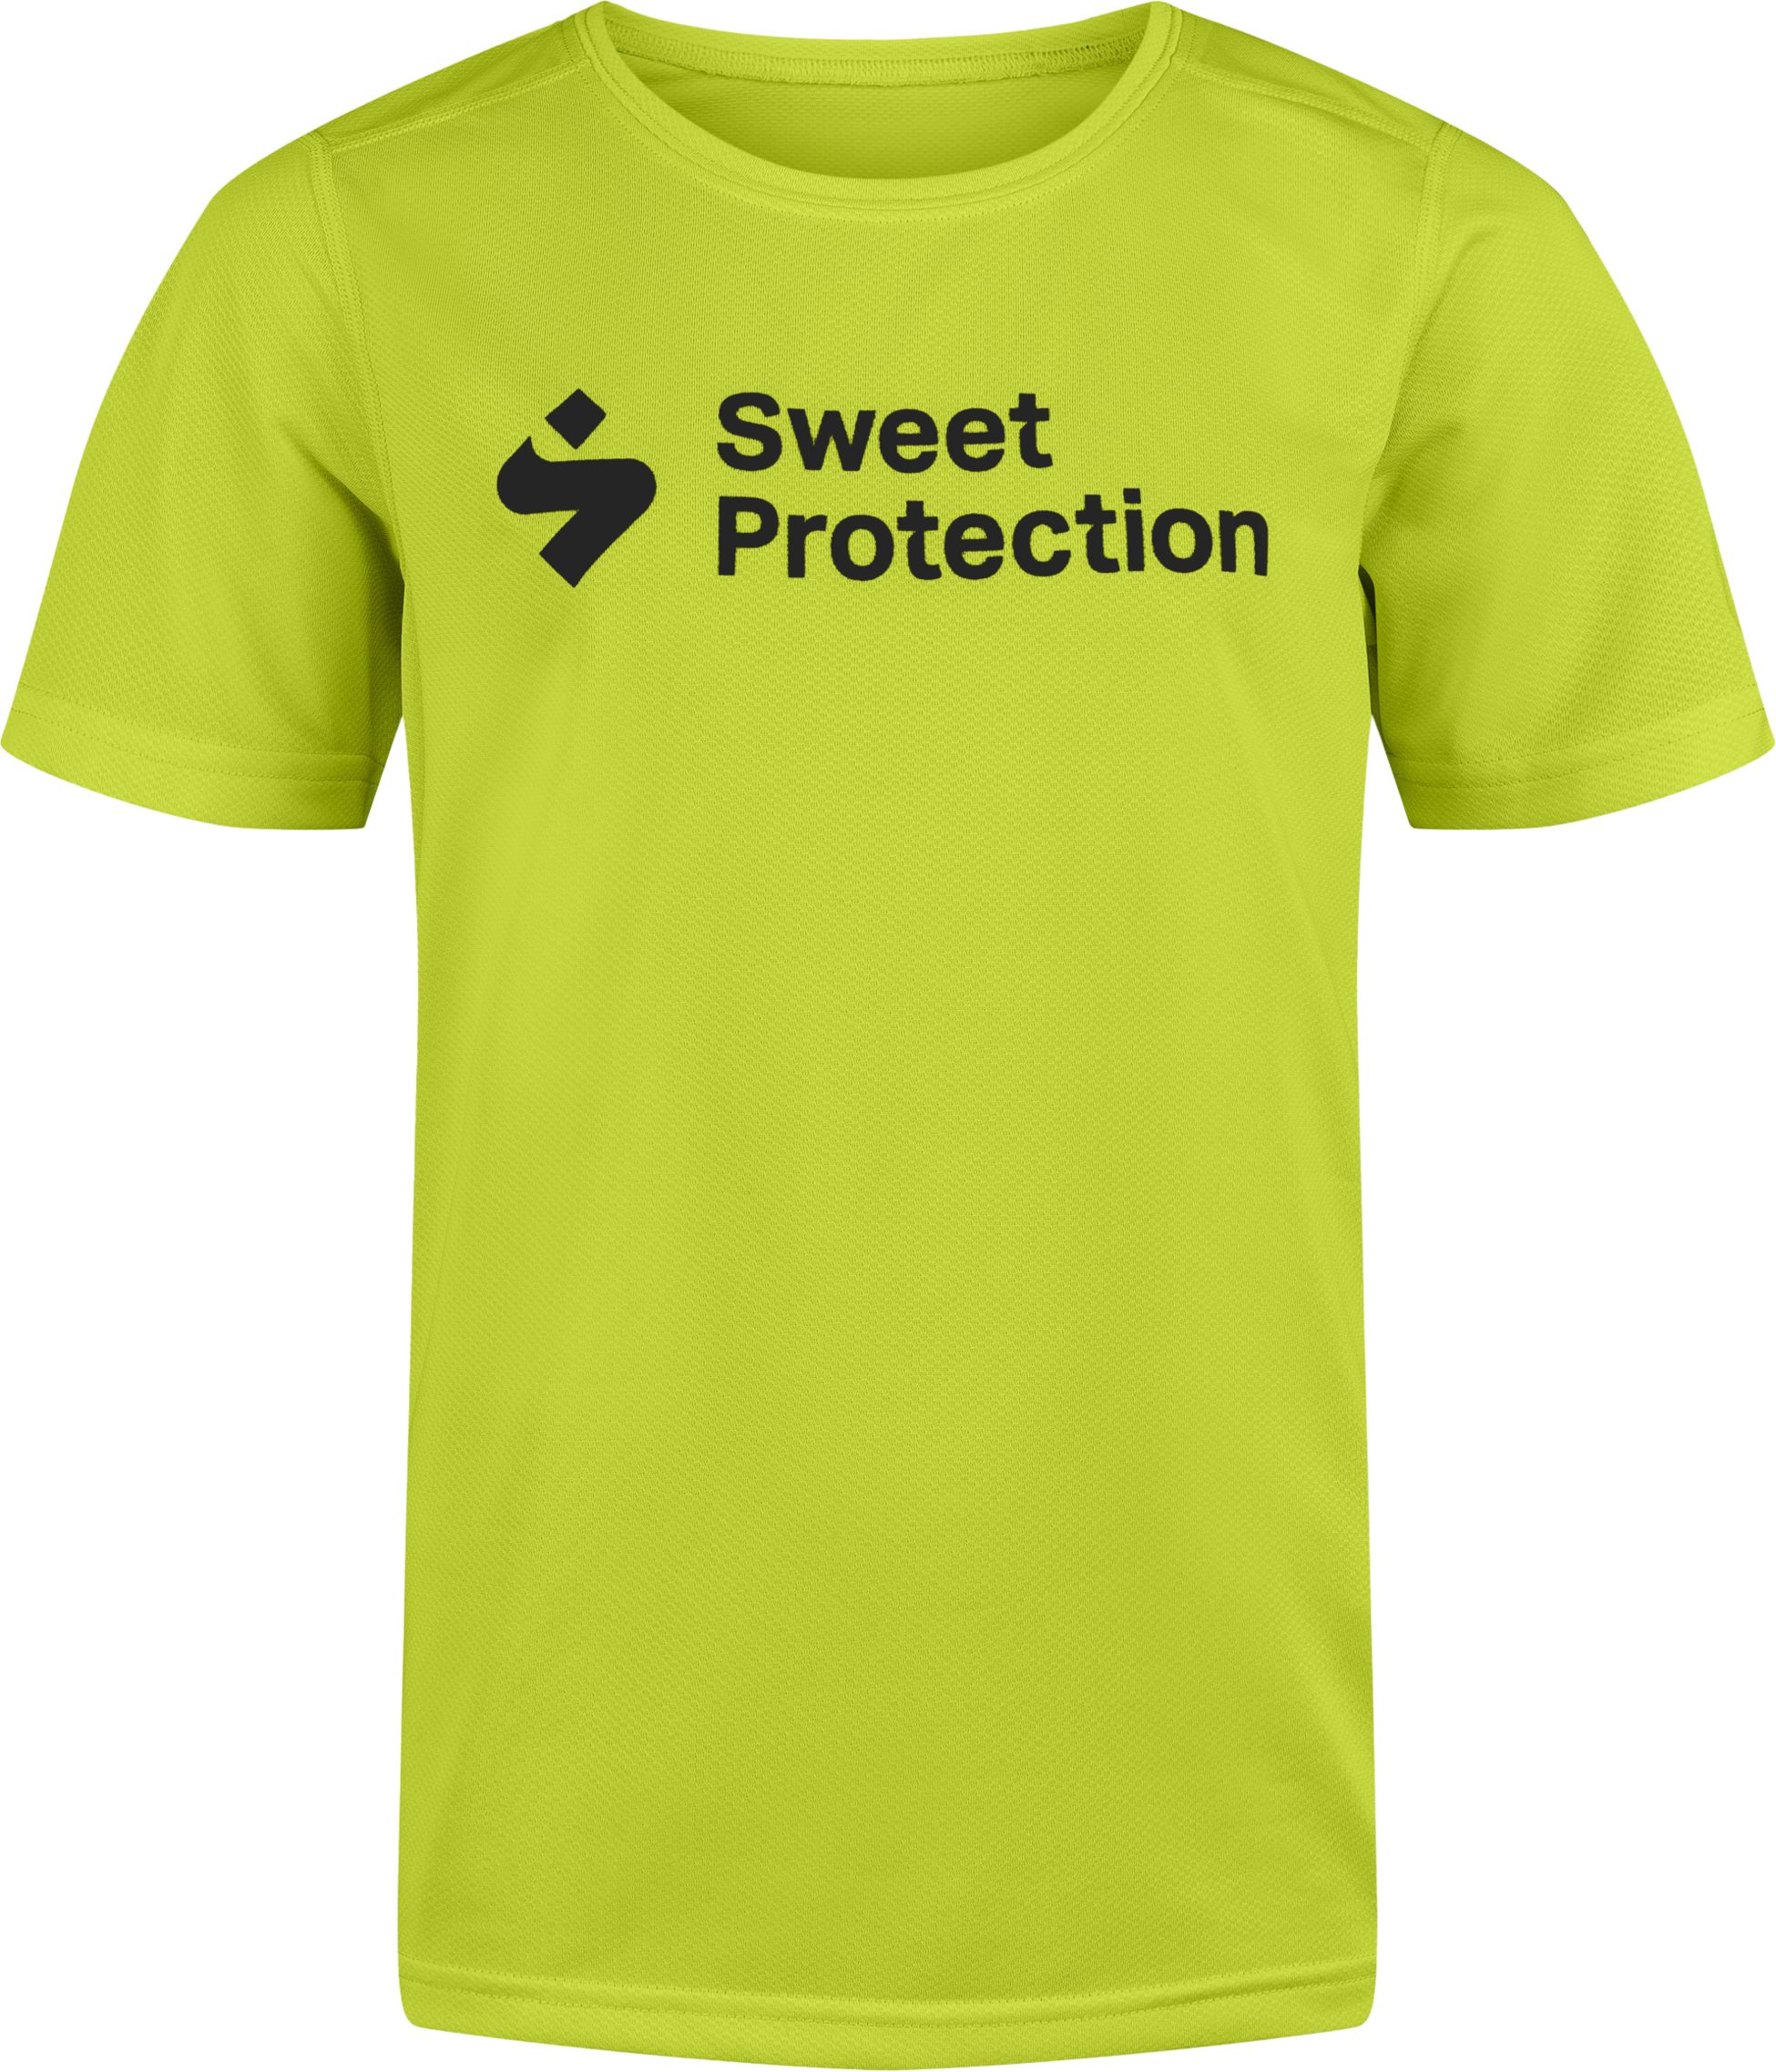 SWEET PROTECTION, Hunter SS Jersey JR